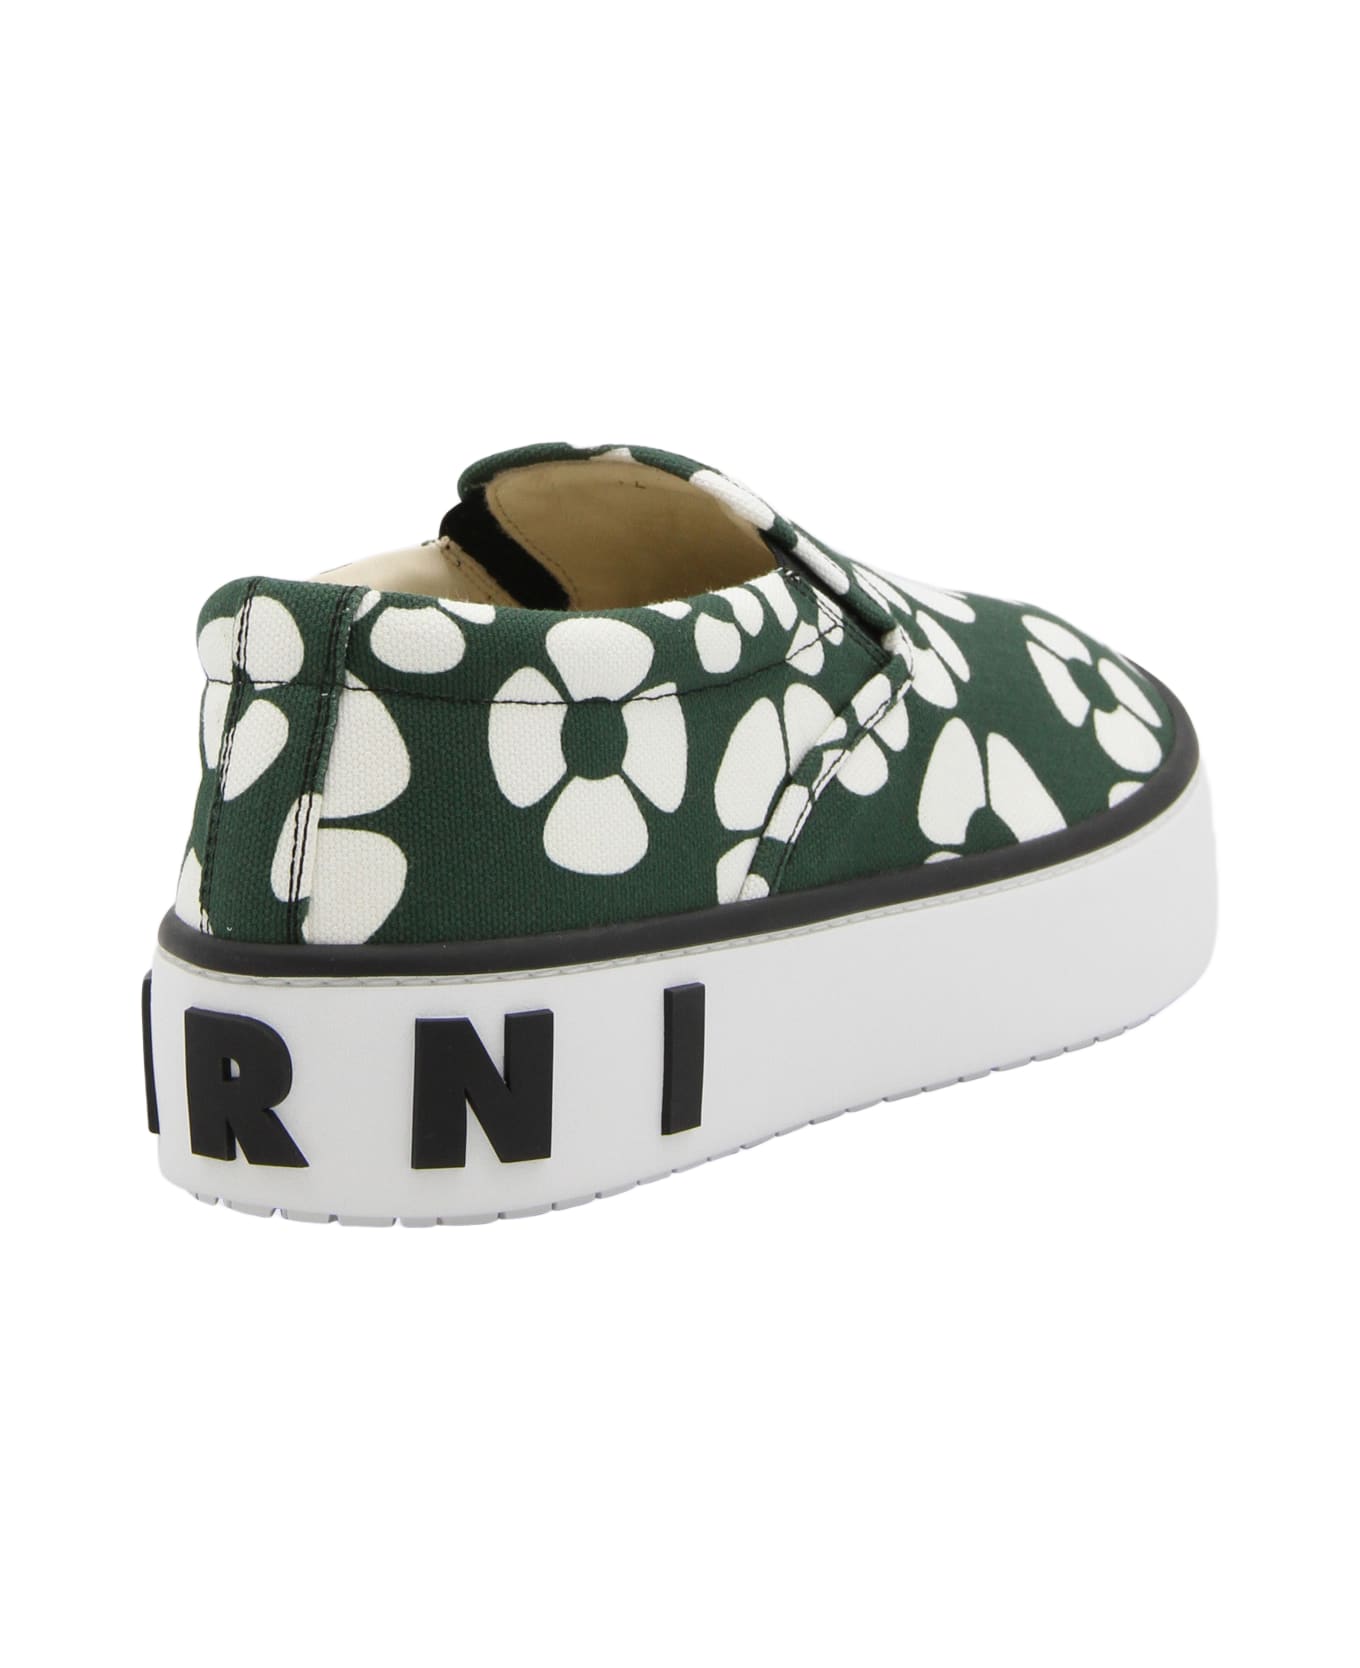 Marni Green And White Canvas Slip On Sneakers - Green スニーカー